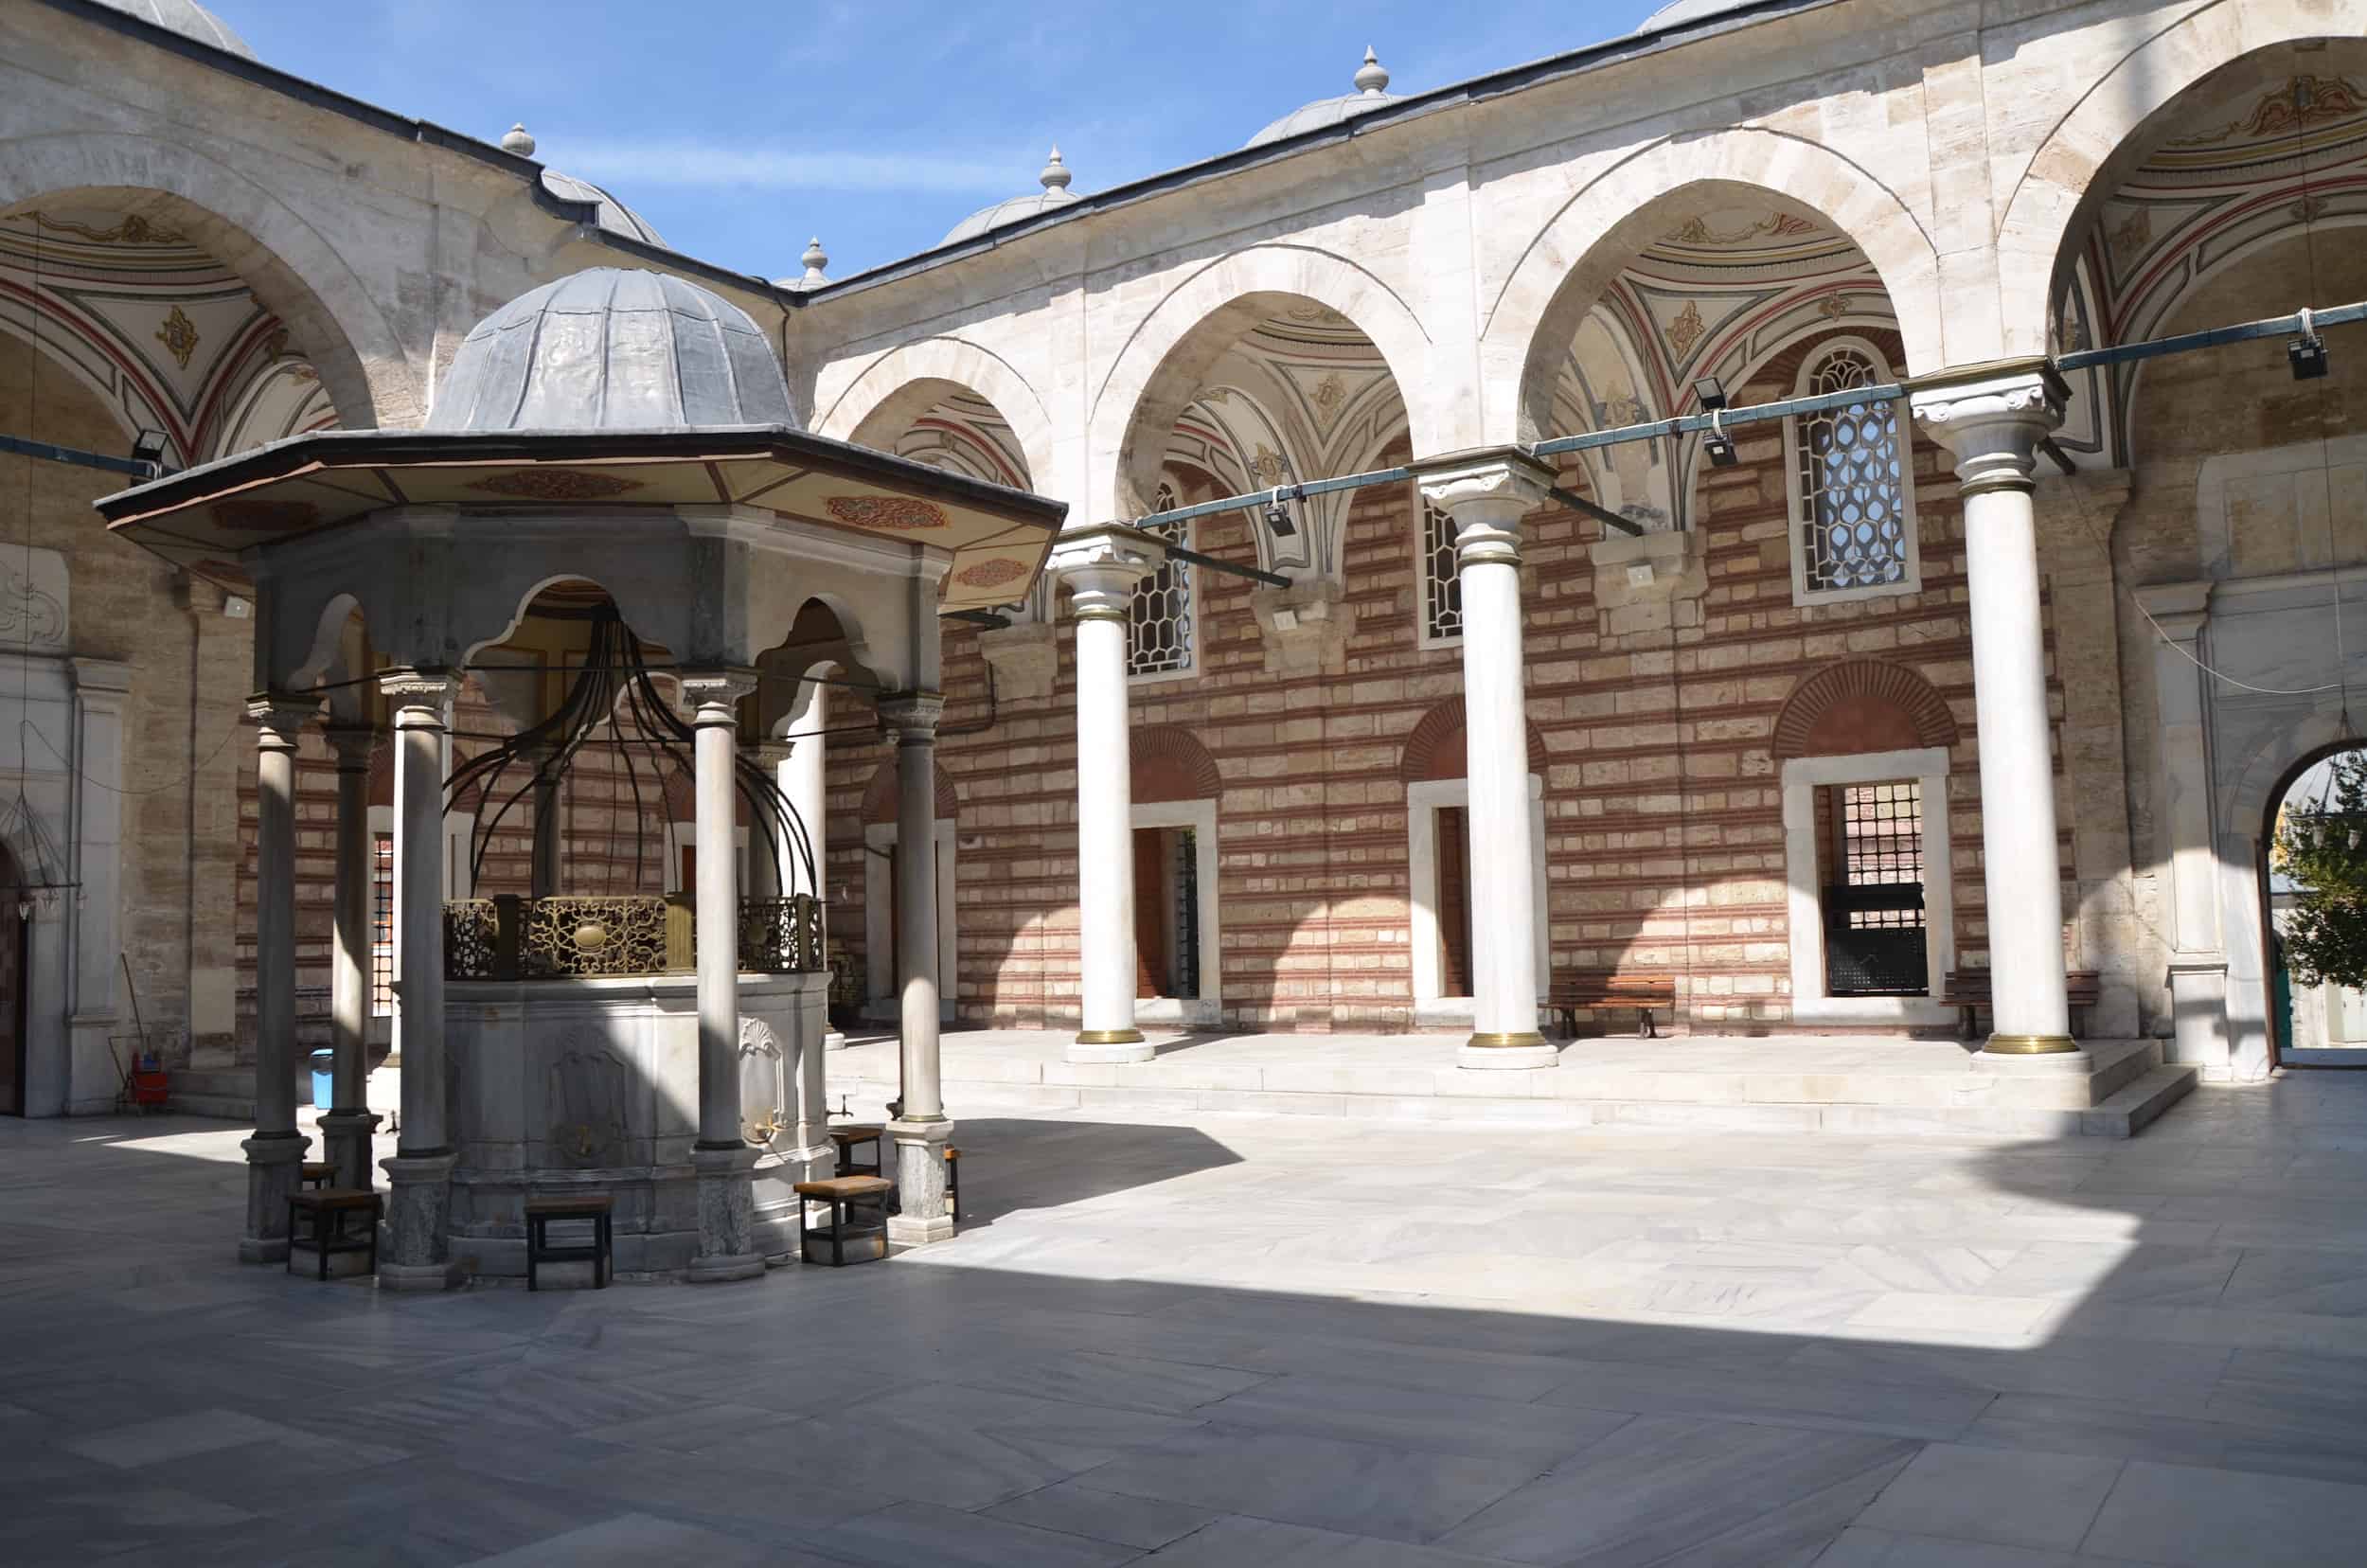 Courtyard of the Laleli Mosque in Laleli, Istanbul, Turkey